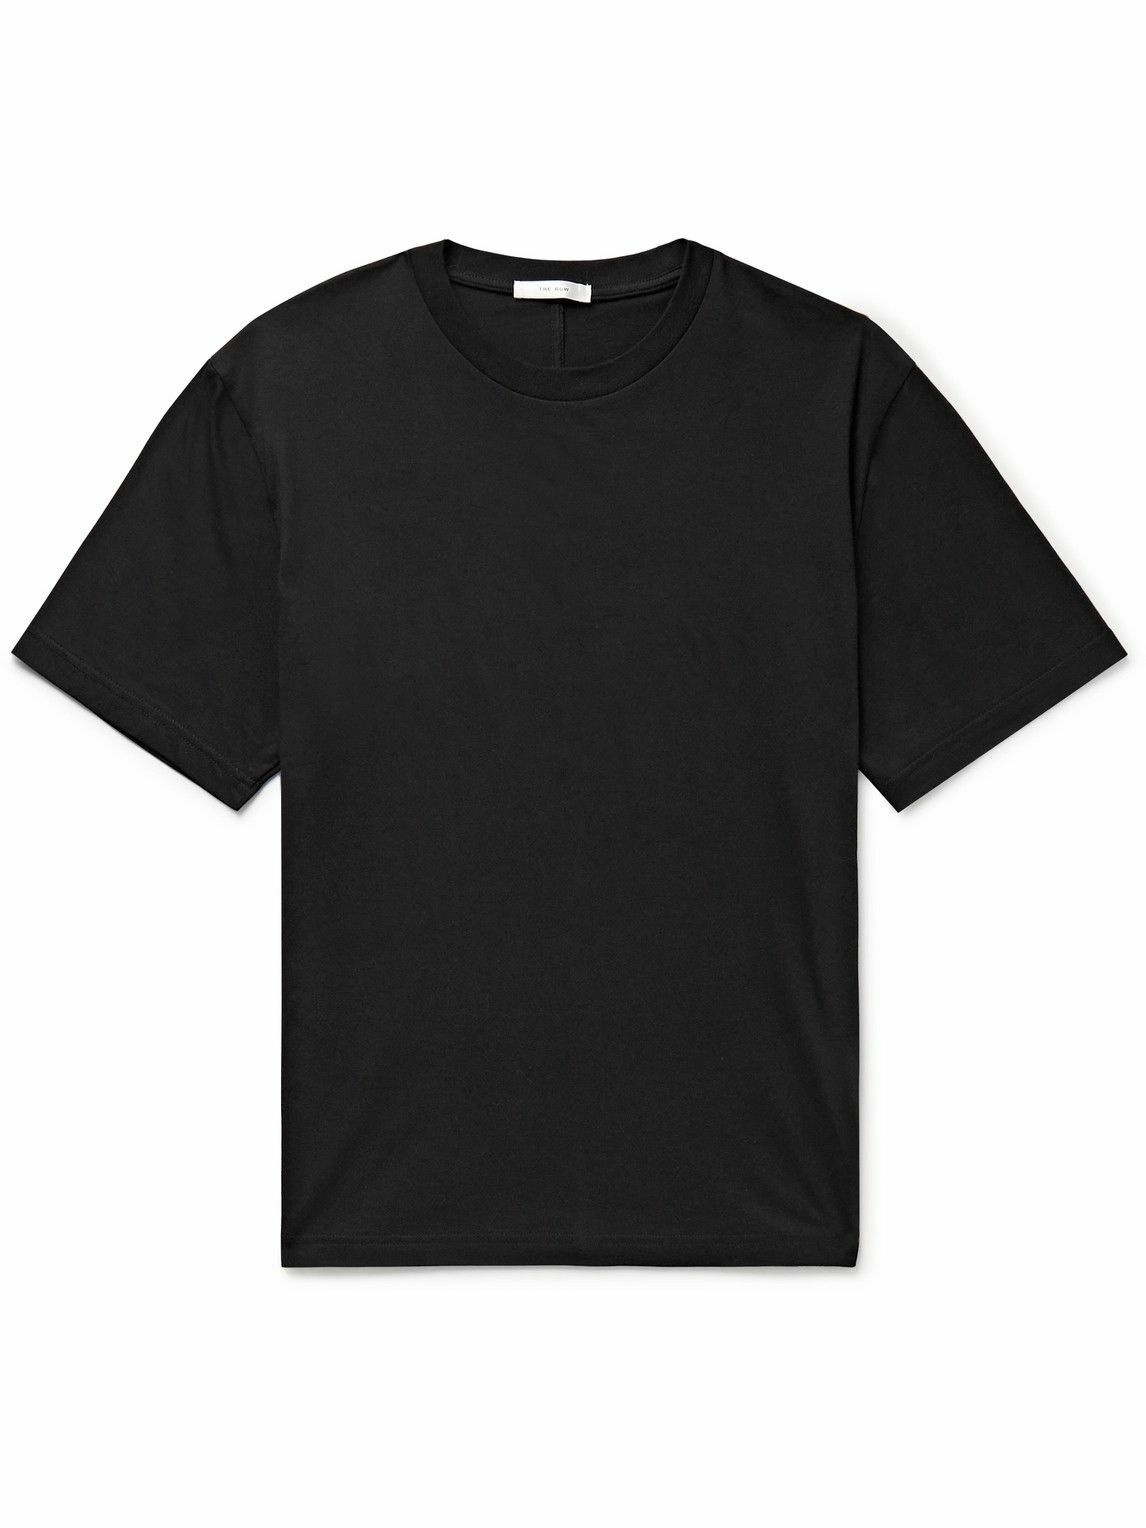 The Row - Errigal Cotton-Jersey T-Shirt - Black The Row